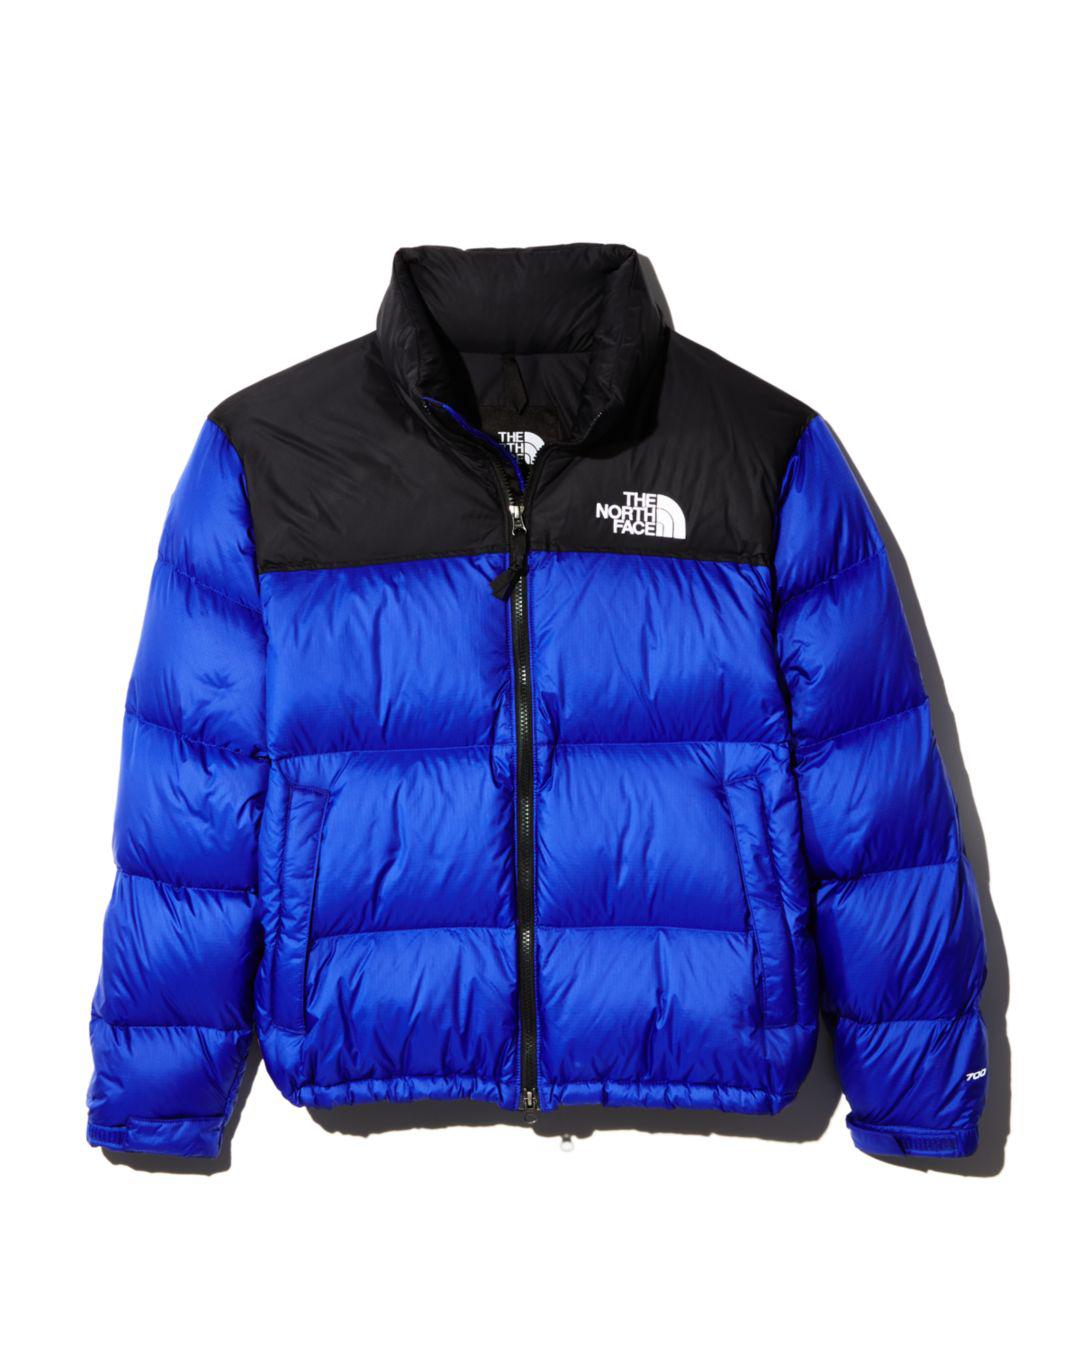 The North Face Synthetic 1996 Retro Nuptse Jacket in Aztec Blue 